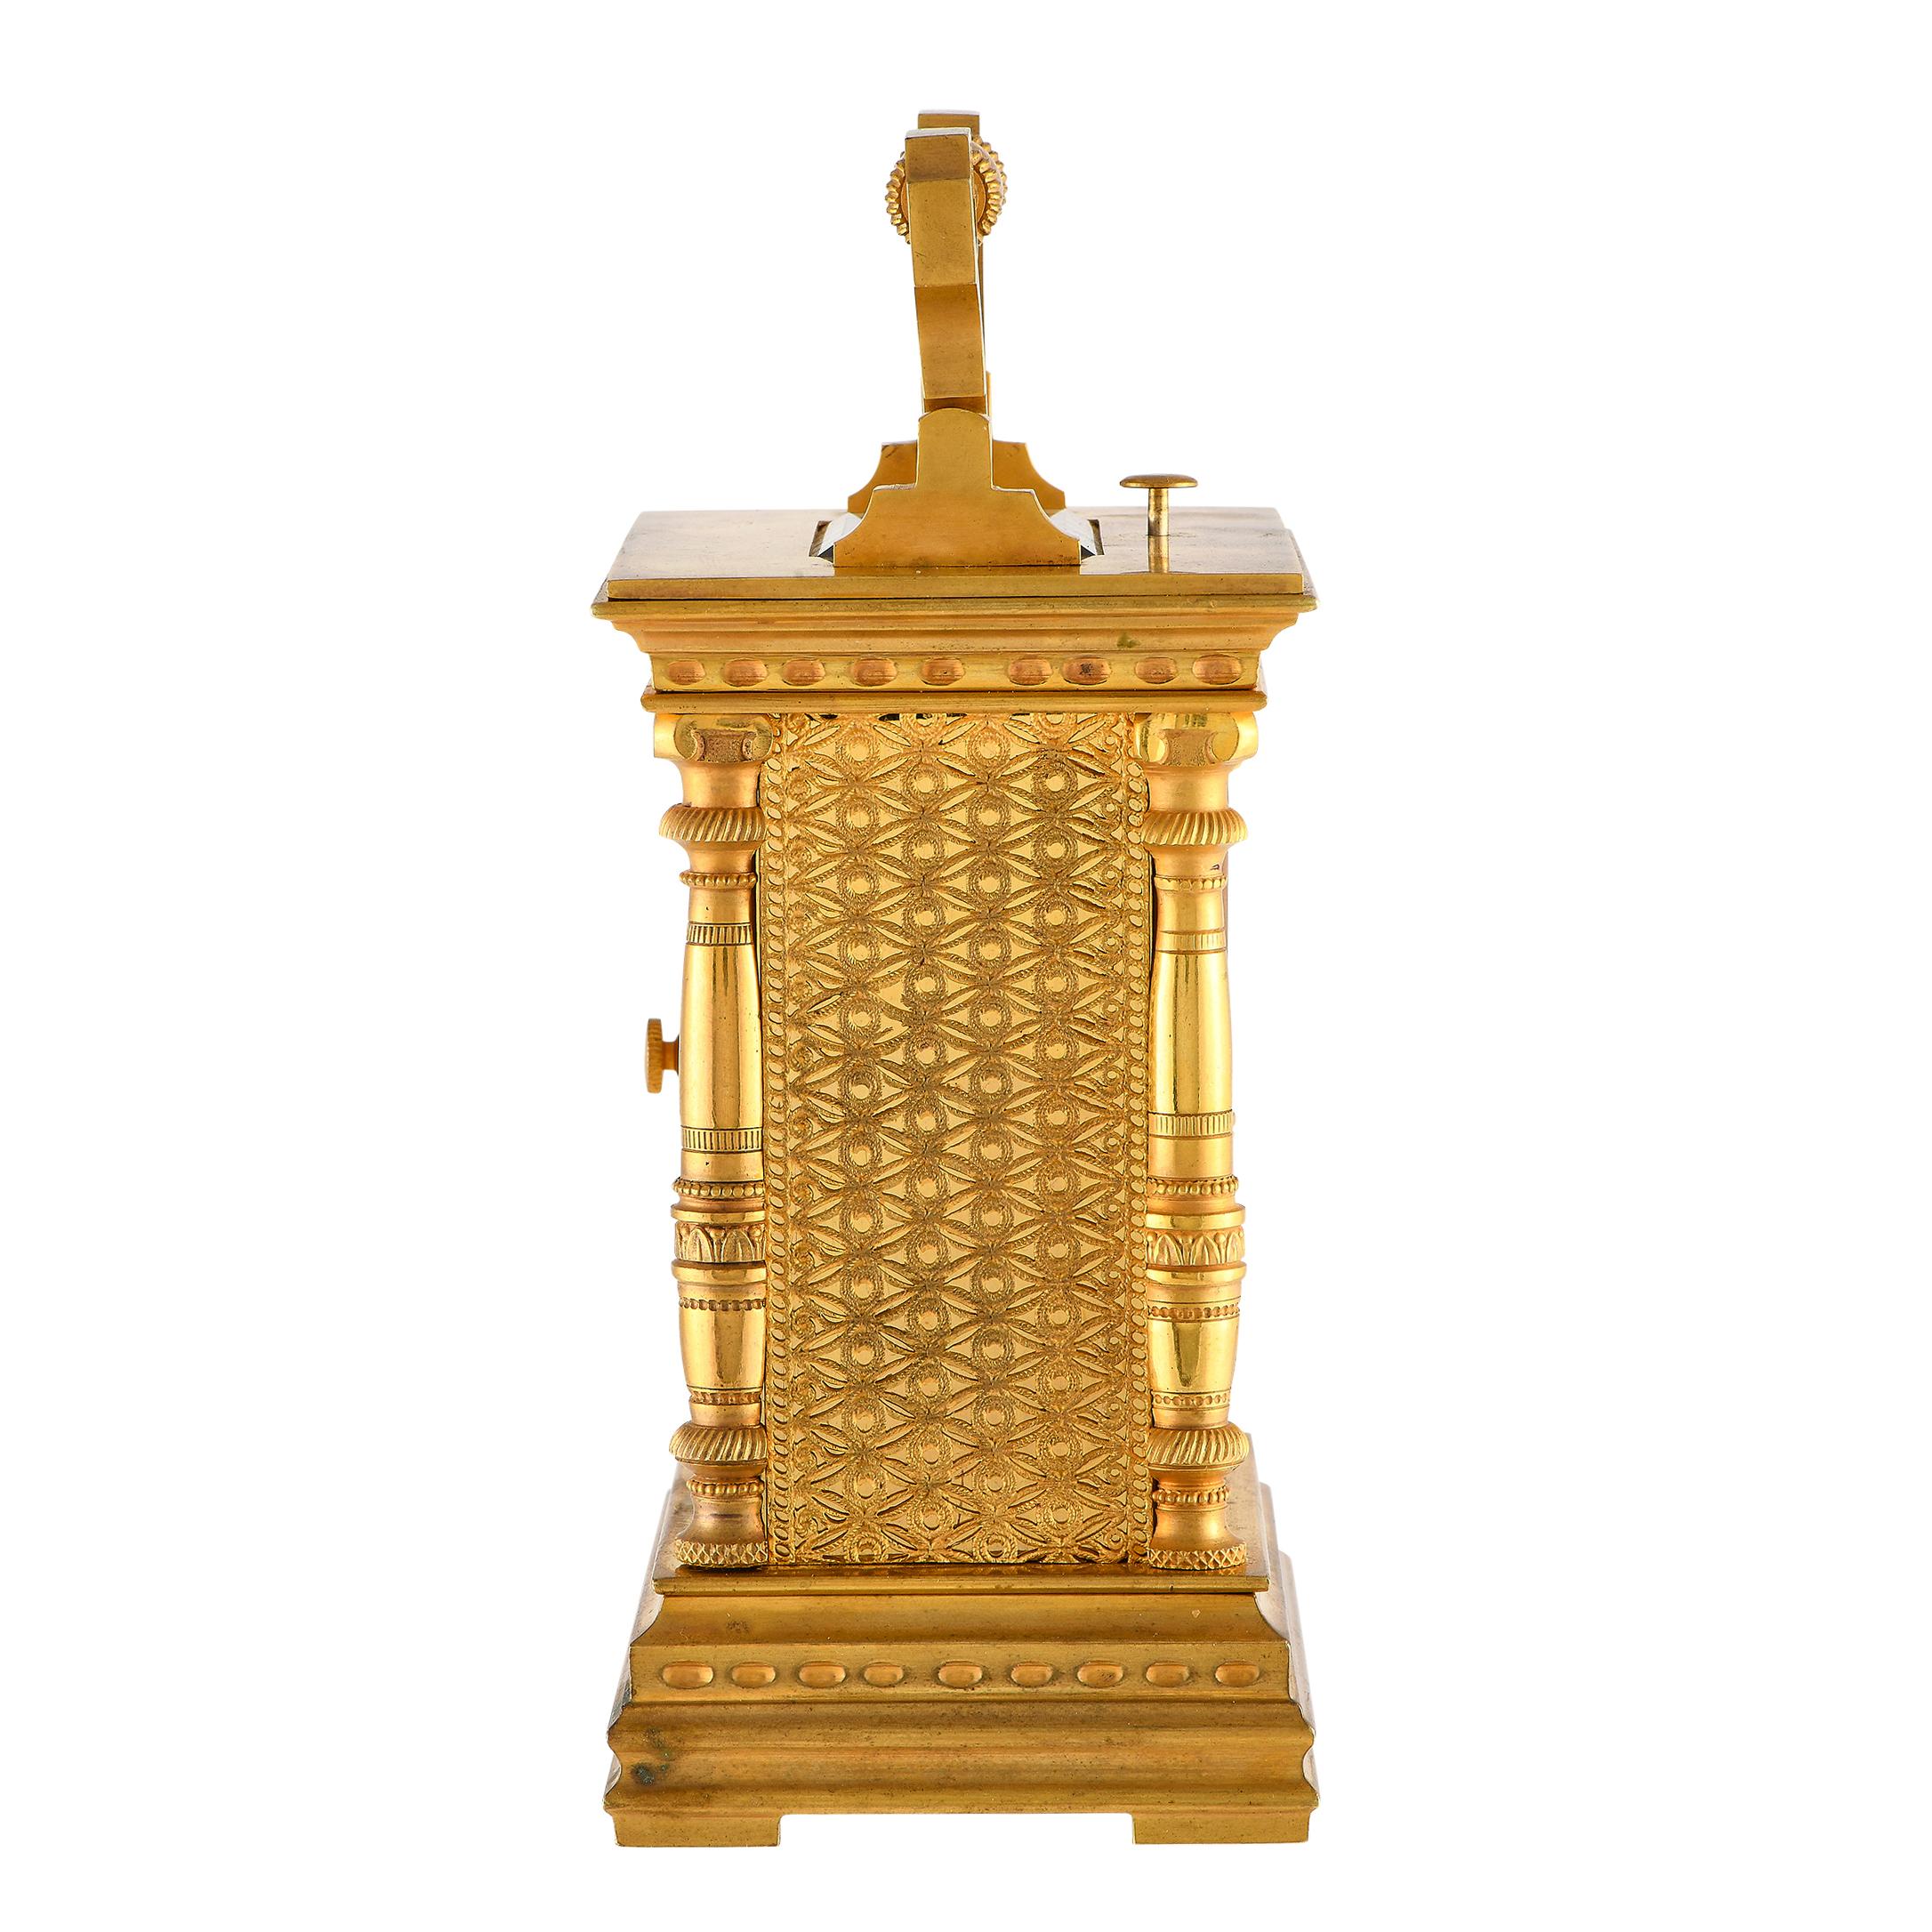 Intricately crafted in gilt brass, here is a fine French carriage clock from the late 19th to early 20th century. This analog timekeeper of a discernible style features heavily decorated columns, ornately patterned sides and back, and an enamel dial